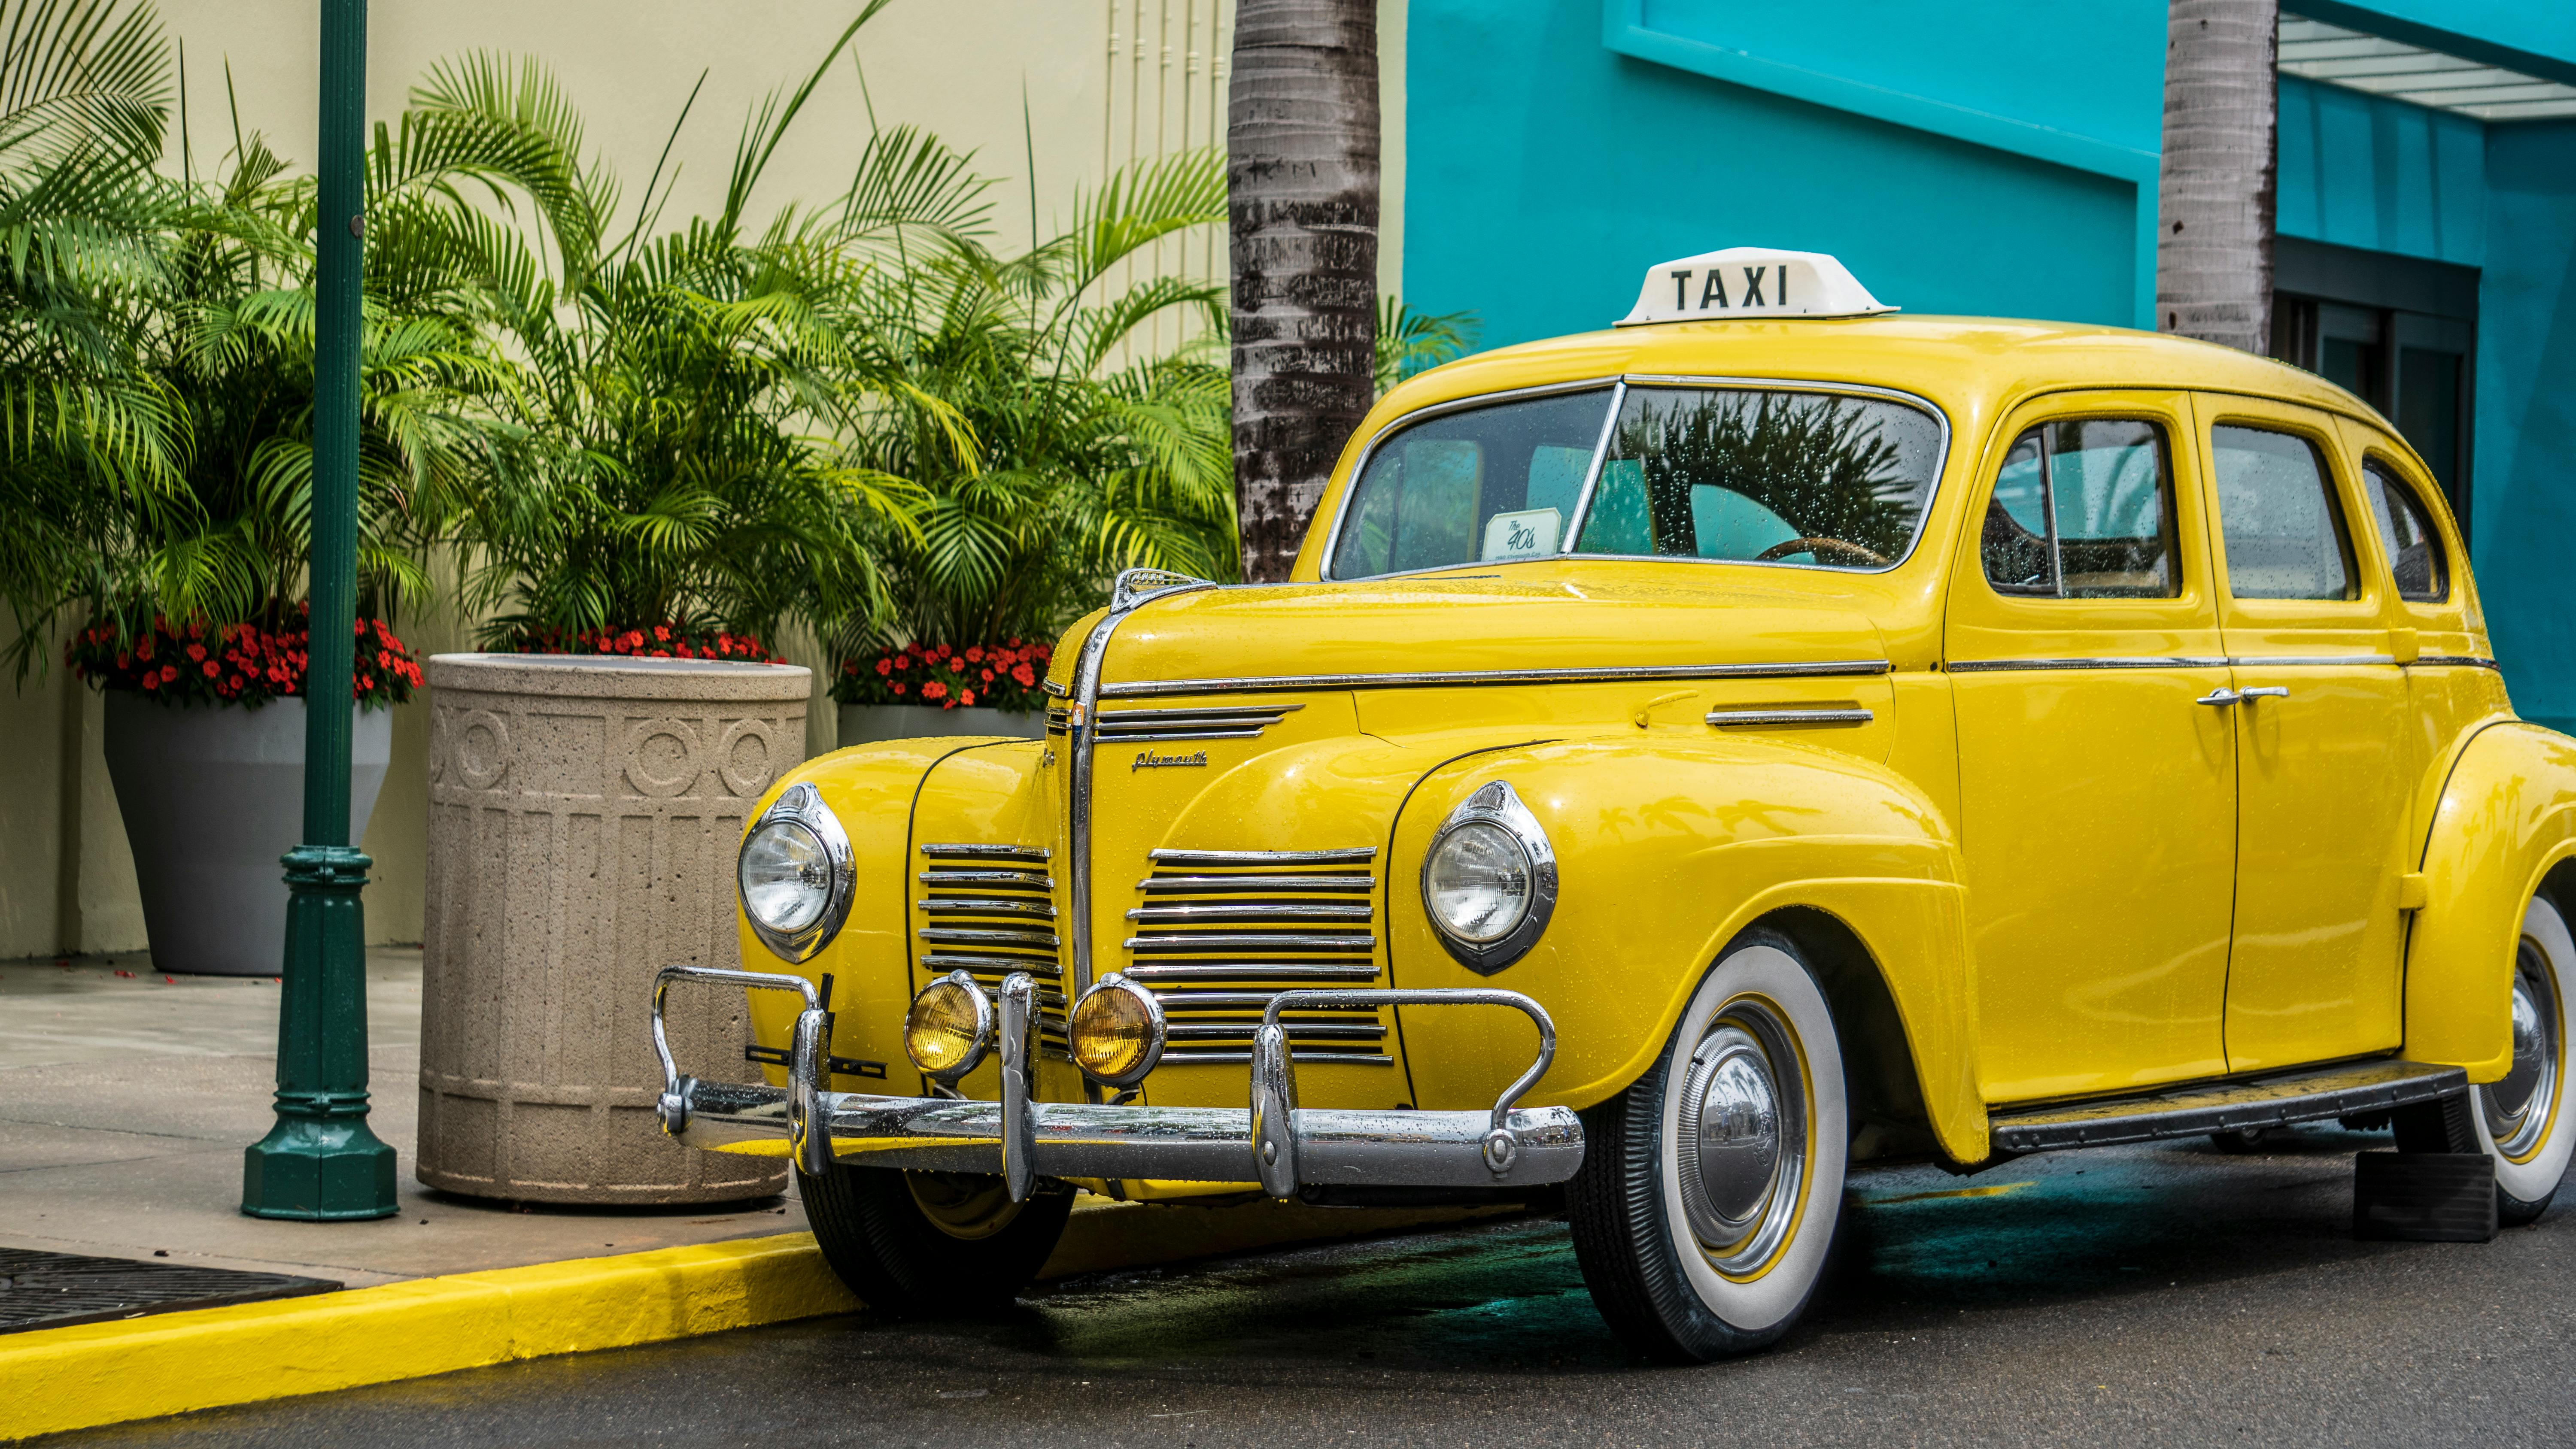 Cab Photos, Download The BEST Free Cab Stock Photos & HD Images